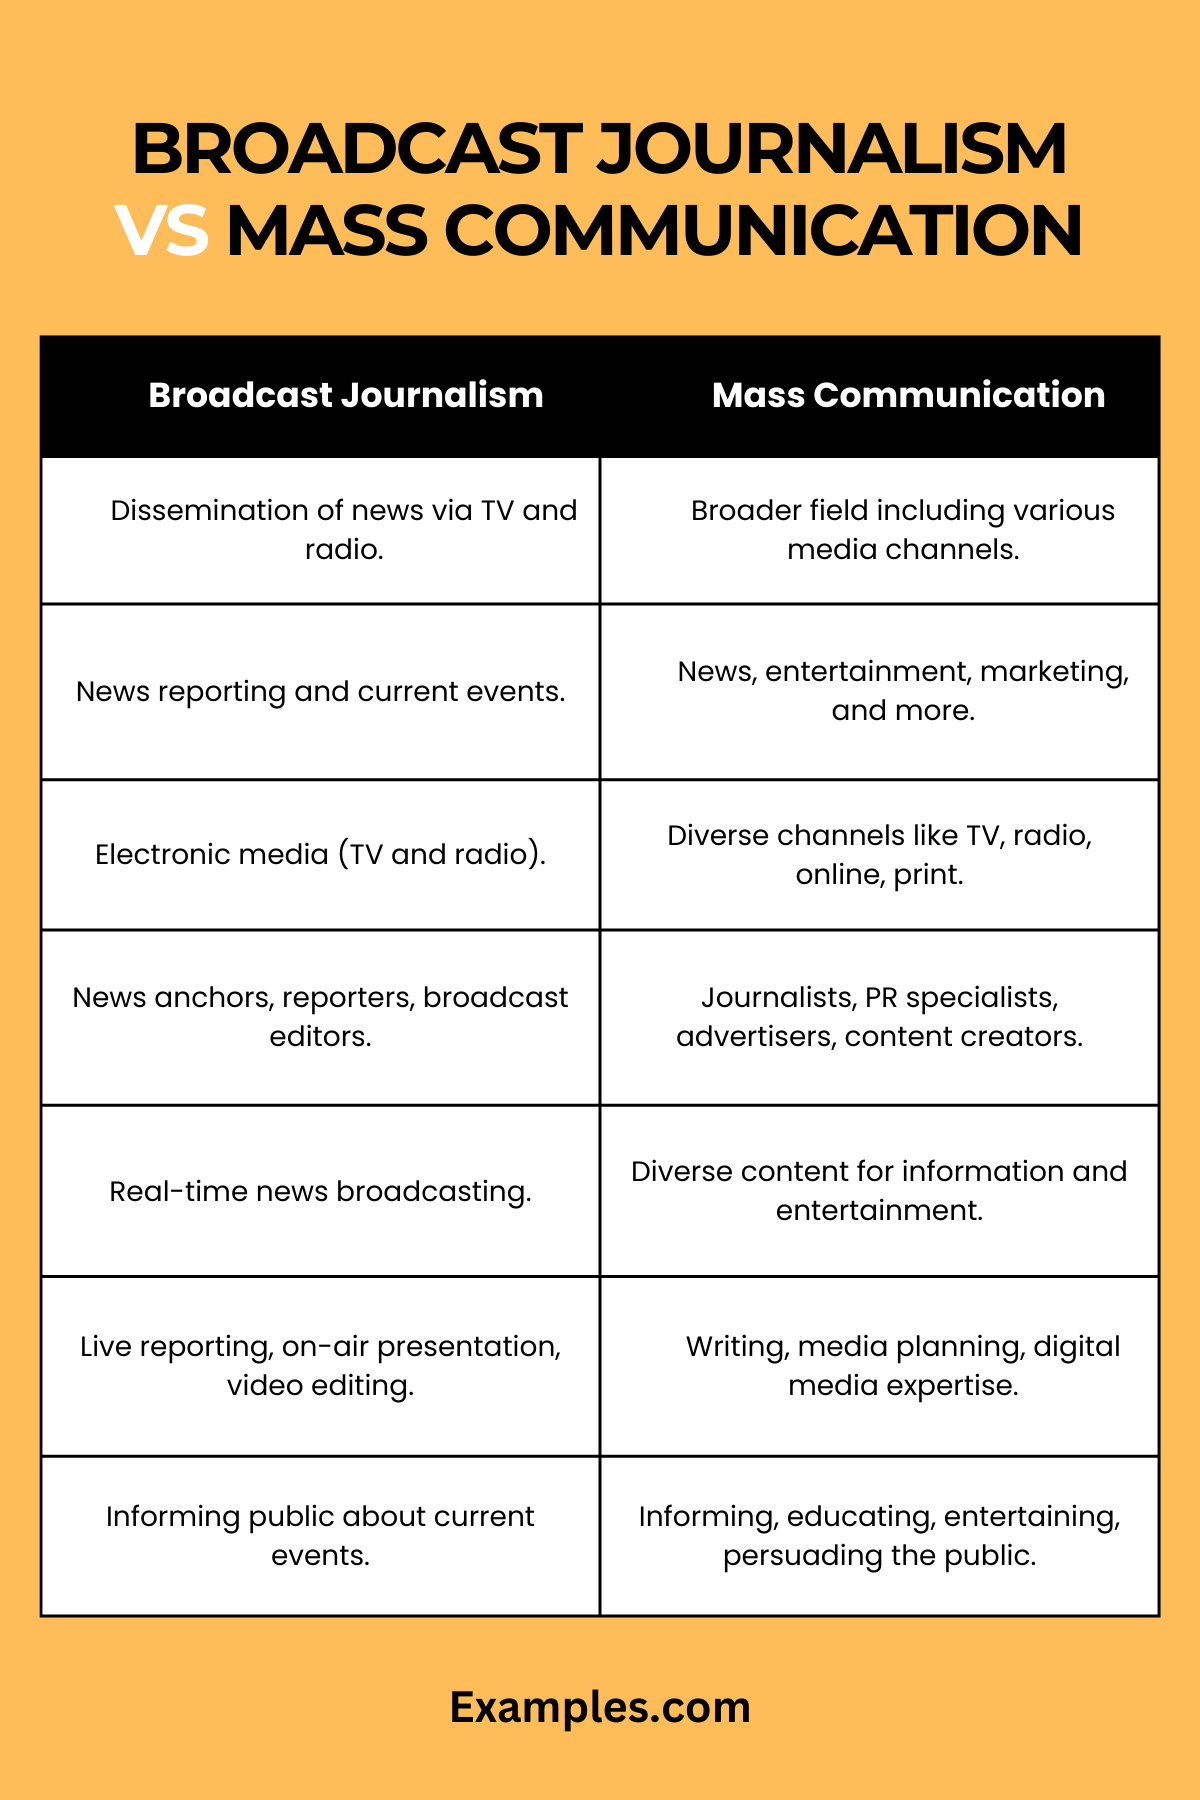 Difference Between Broadcast Journalism and Mass Communication